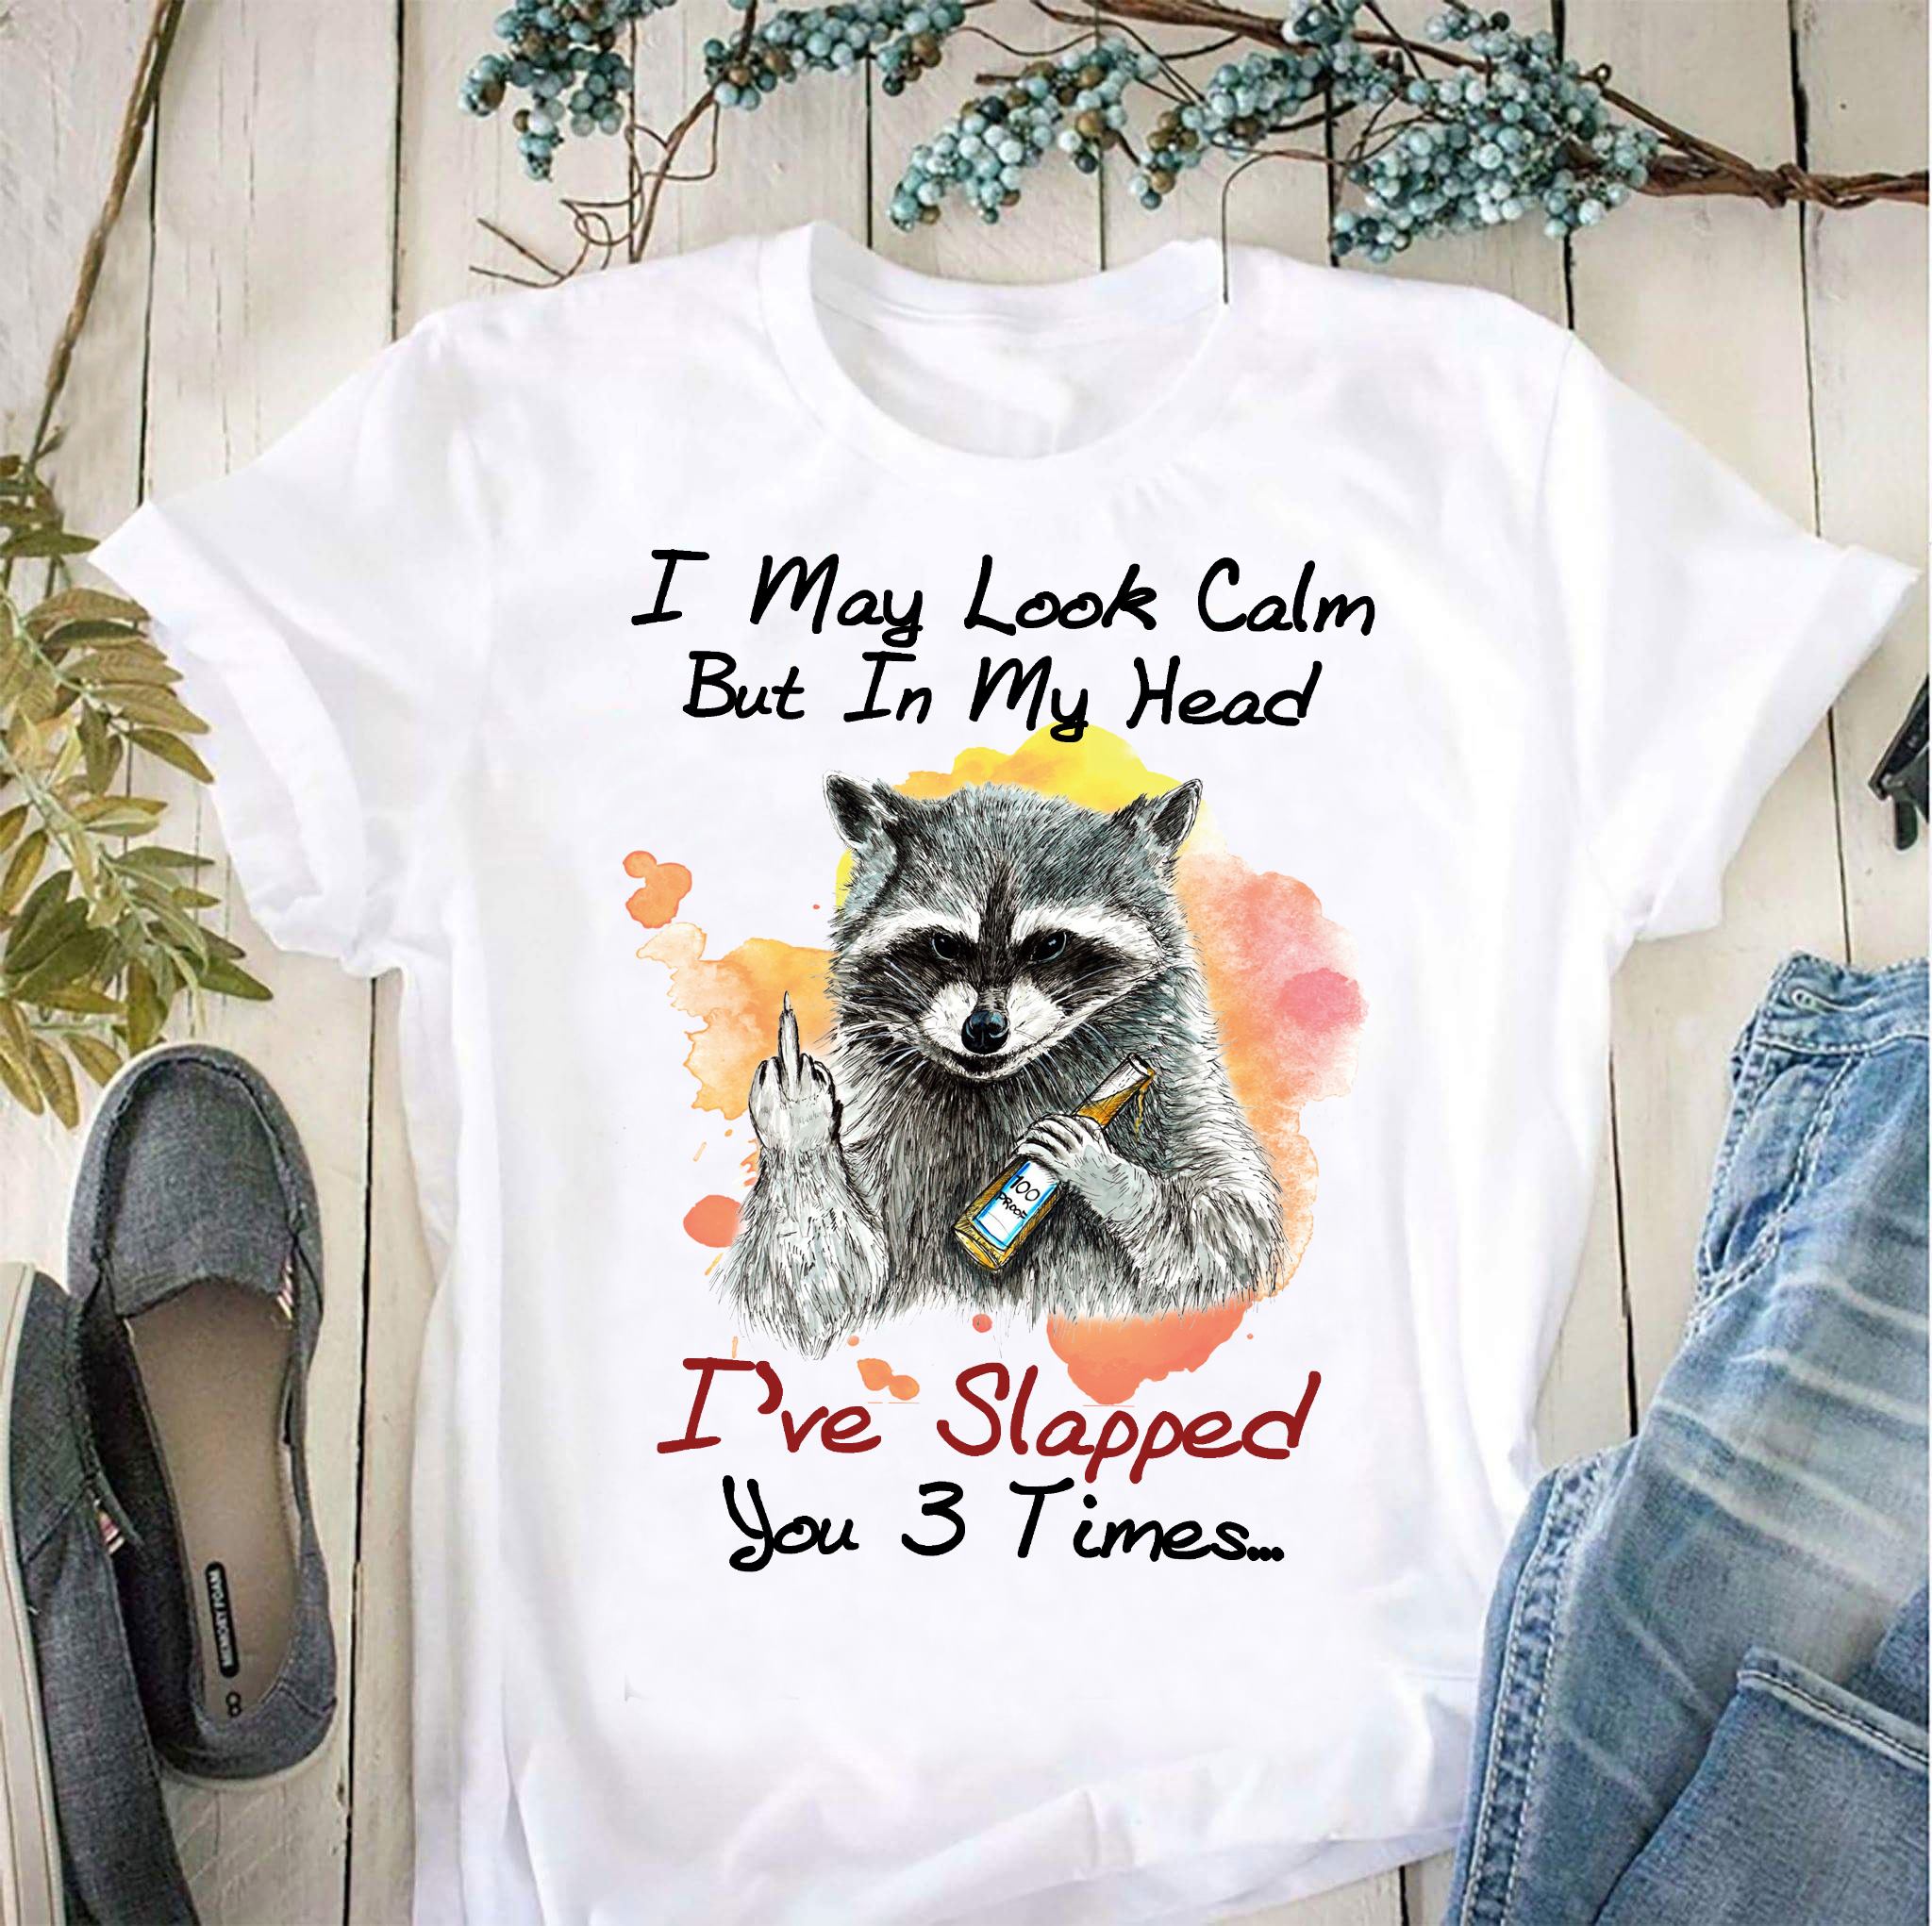 I may look calm but in my head I've slapped you 3 times - Racoon and beer